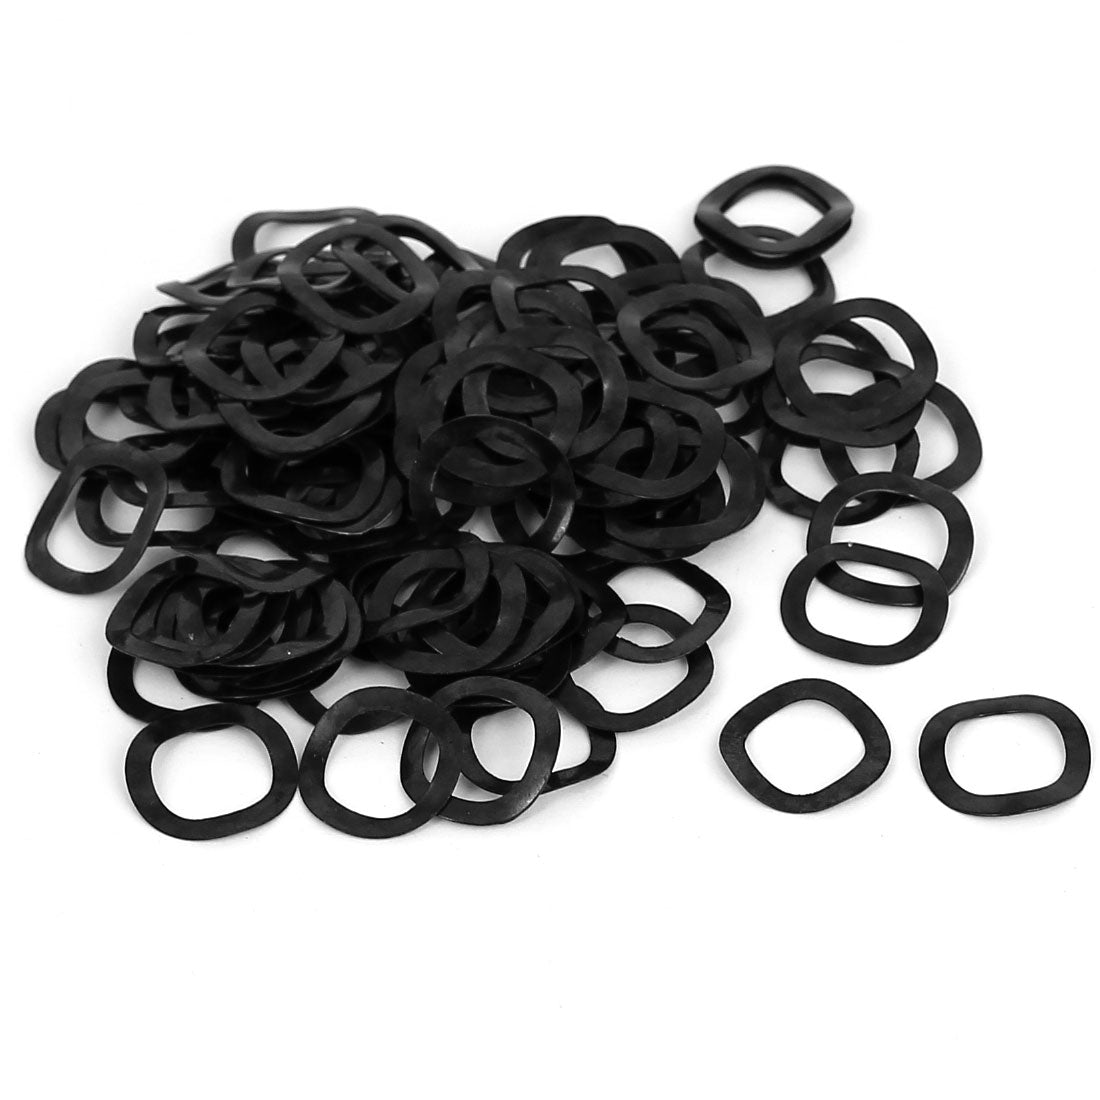 uxcell Uxcell 100pcs Black Metal Wavy Wave Crinkle Spring Washers 10mm x 15mm x 0.3mm